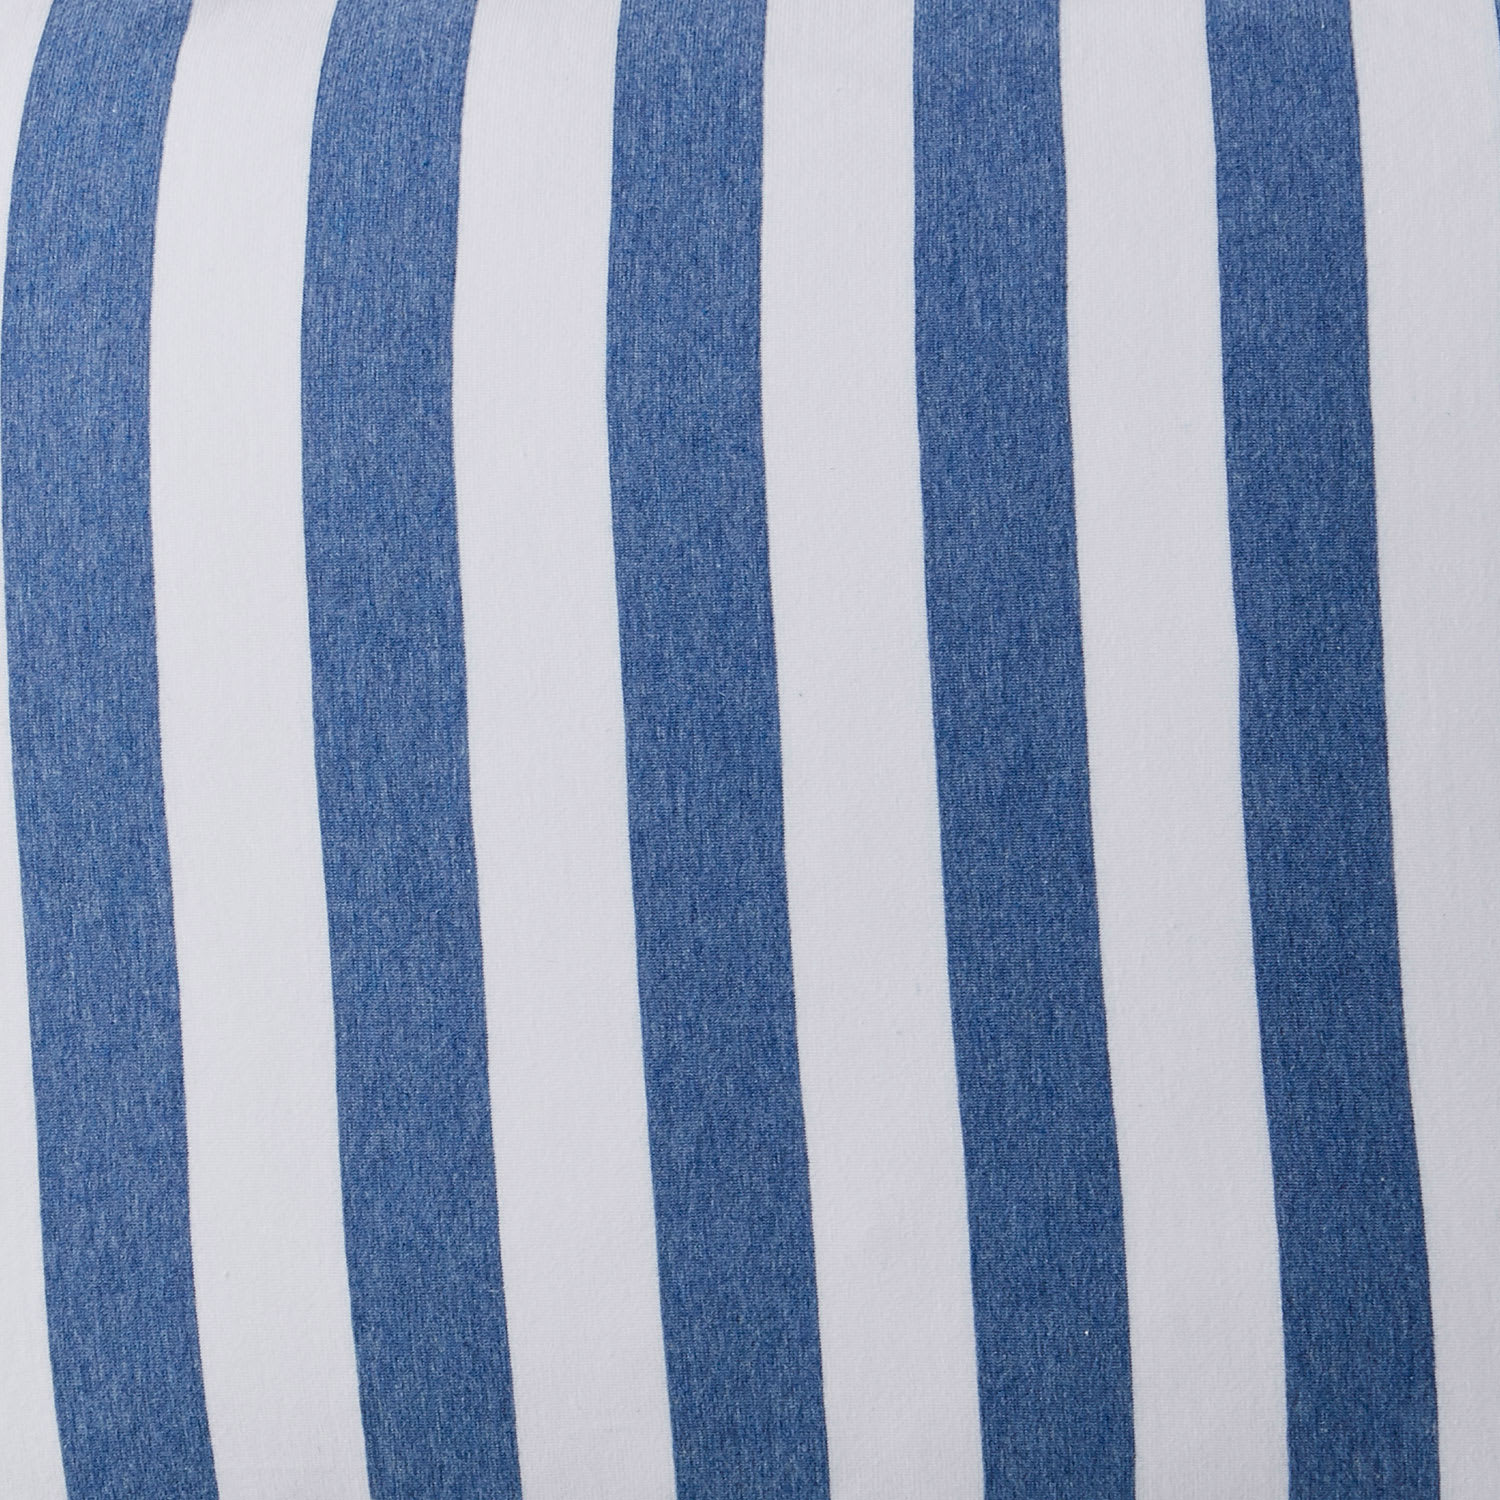 Awning Stripe Space-Dyed Cotton Jersey Fitted Sheet - Blue